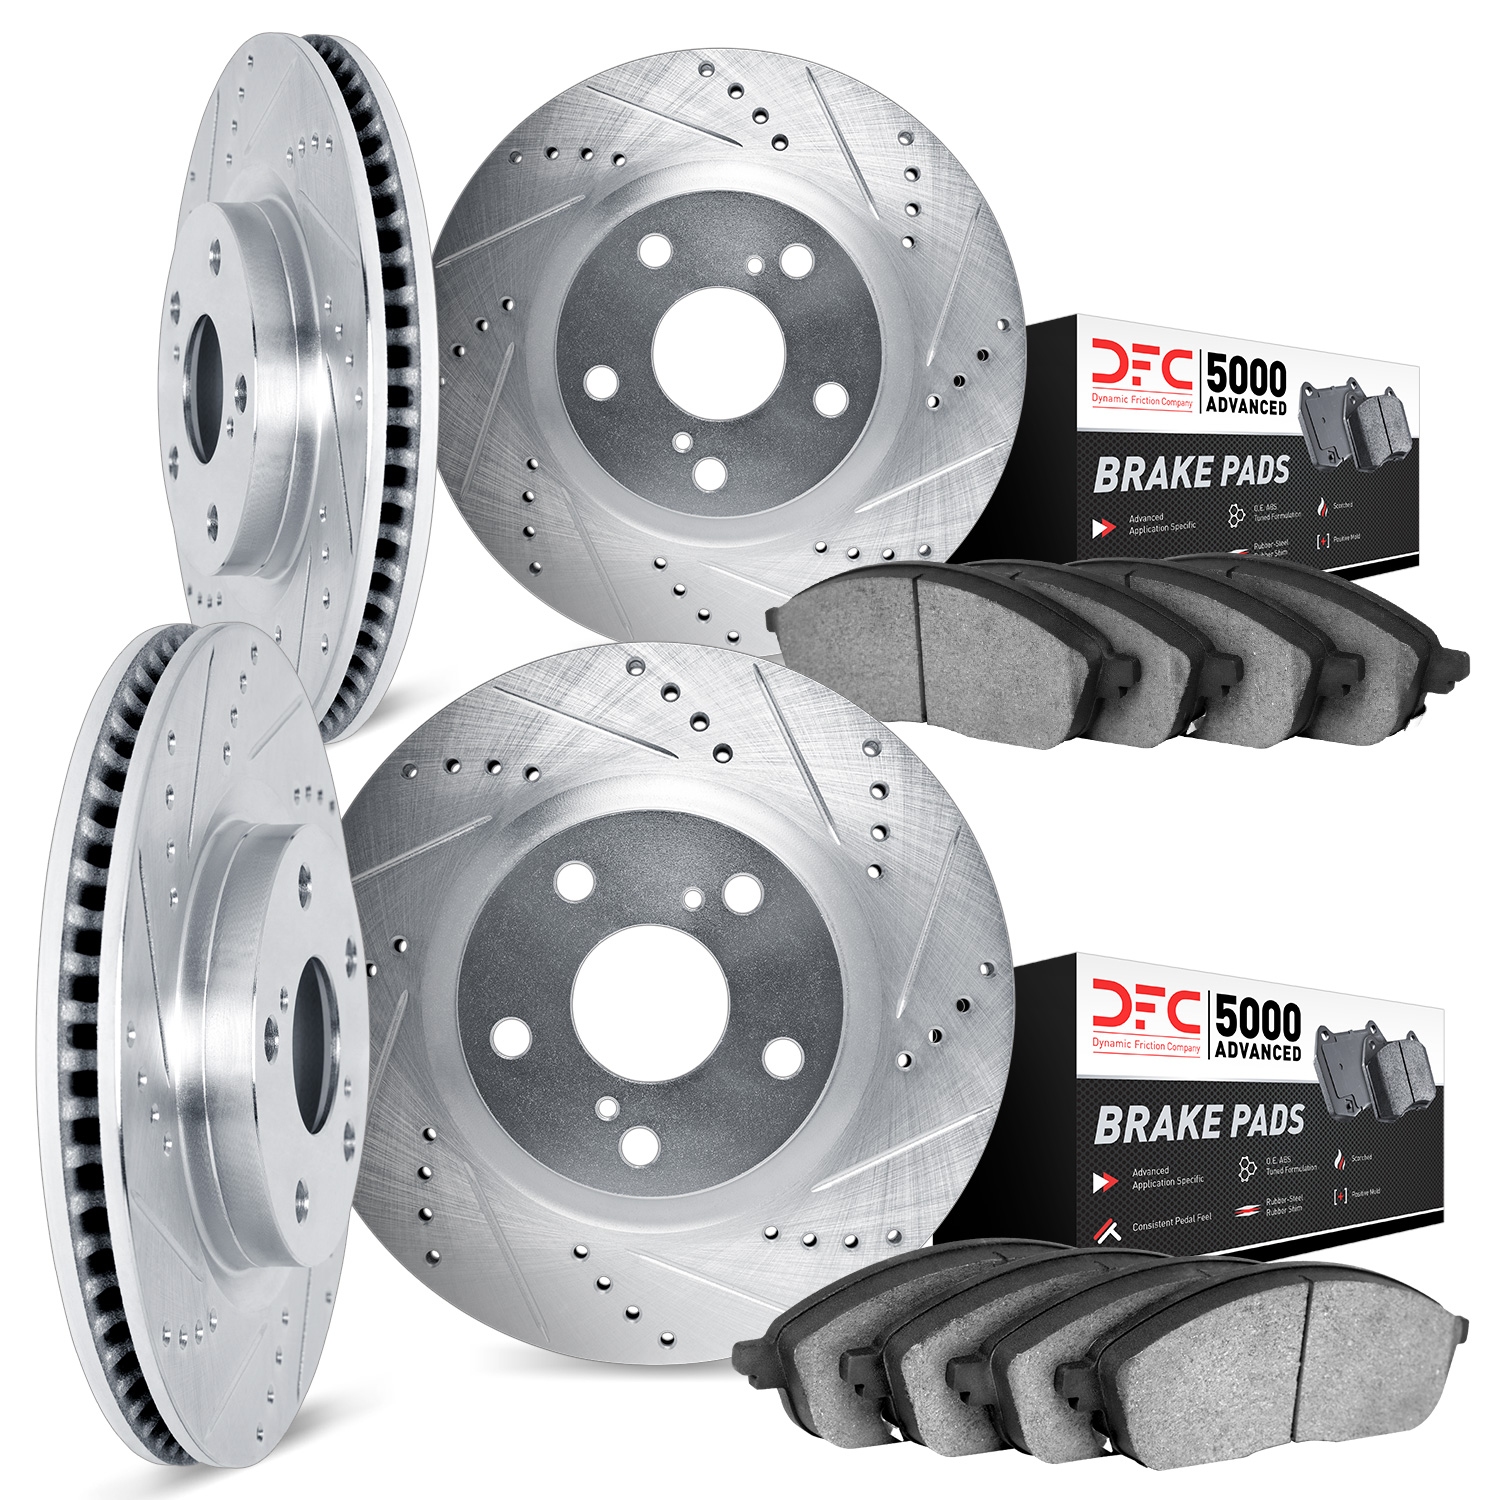 7504-13008 Drilled/Slotted Brake Rotors w/5000 Advanced Brake Pads Kit [Silver], 2005-2007 Subaru, Position: Front and Rear